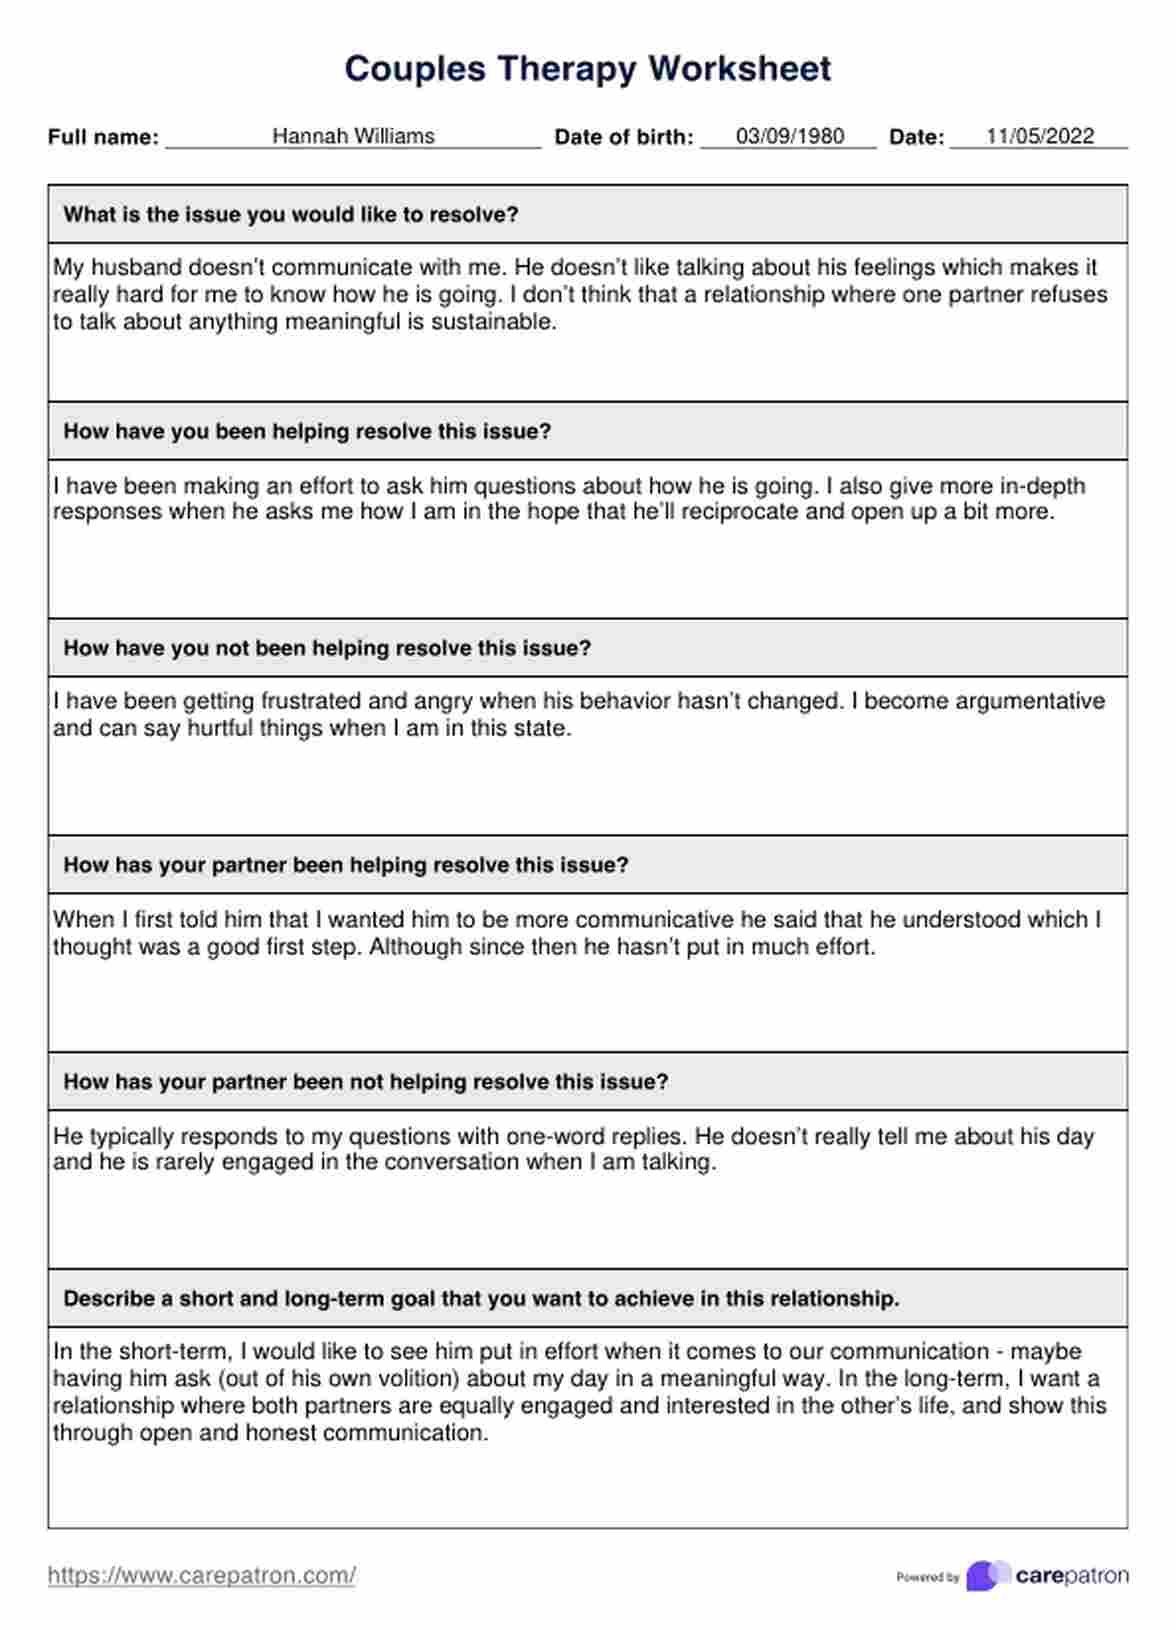 Couples Therapy Worksheet Template PDF Example